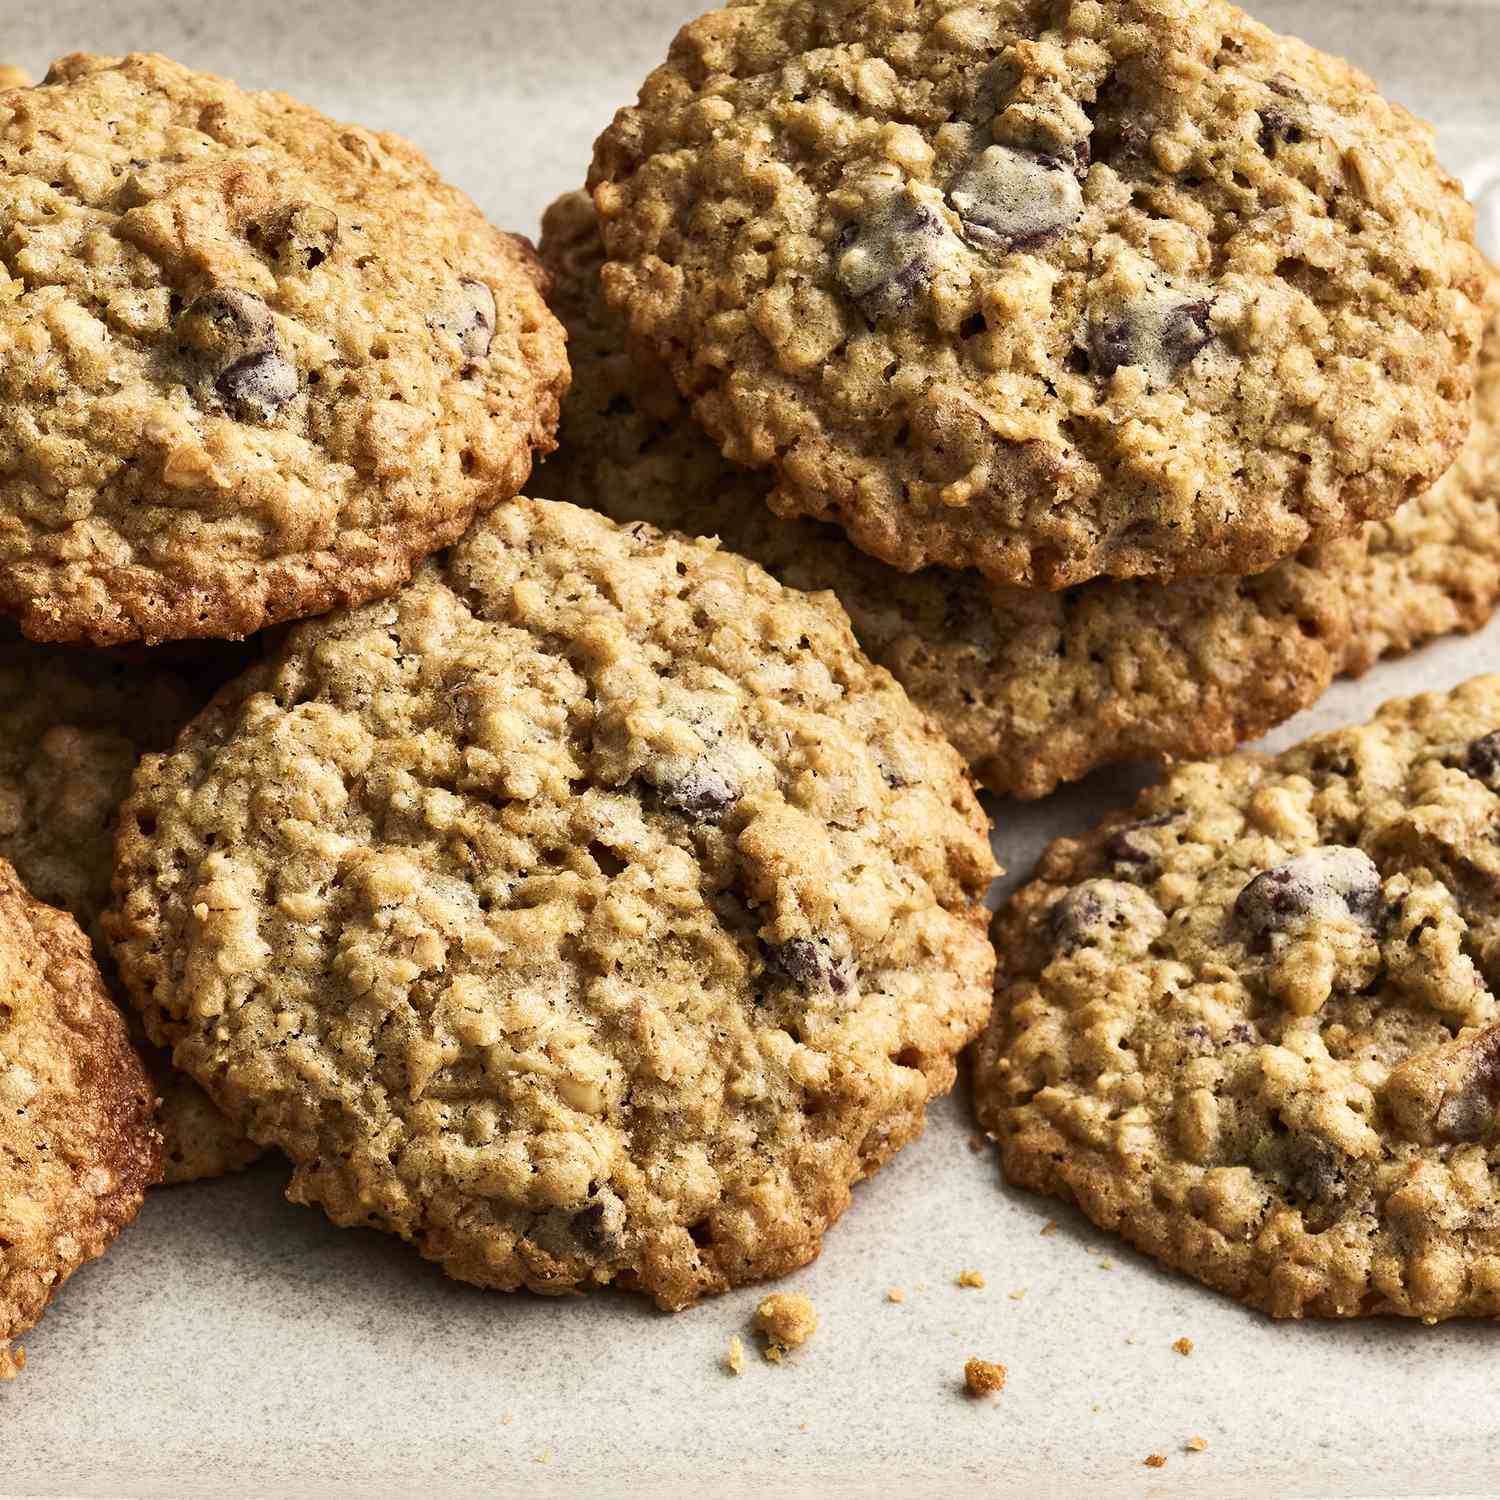 a close up view of a pile of chewy chocolate chip oatmeal cookies